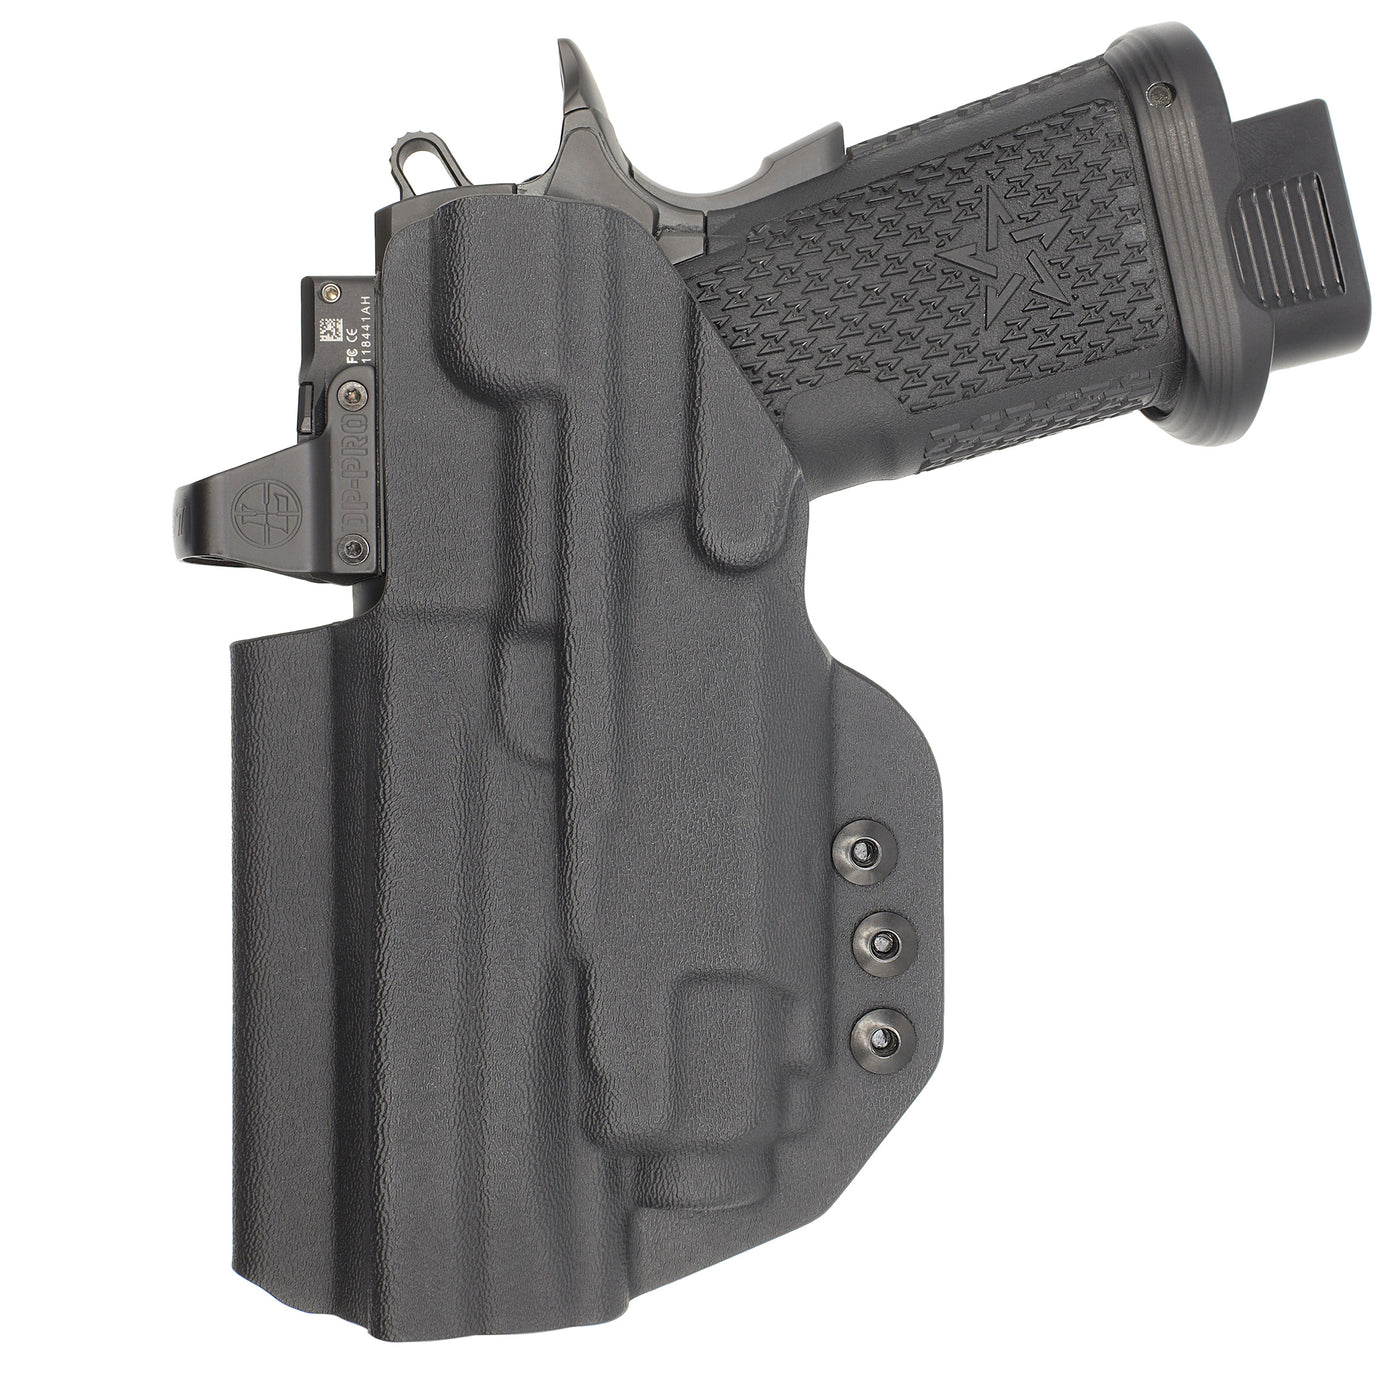 C&G Holsters quickship IWB tactical 2011 streamlight TLR8 holstered back view